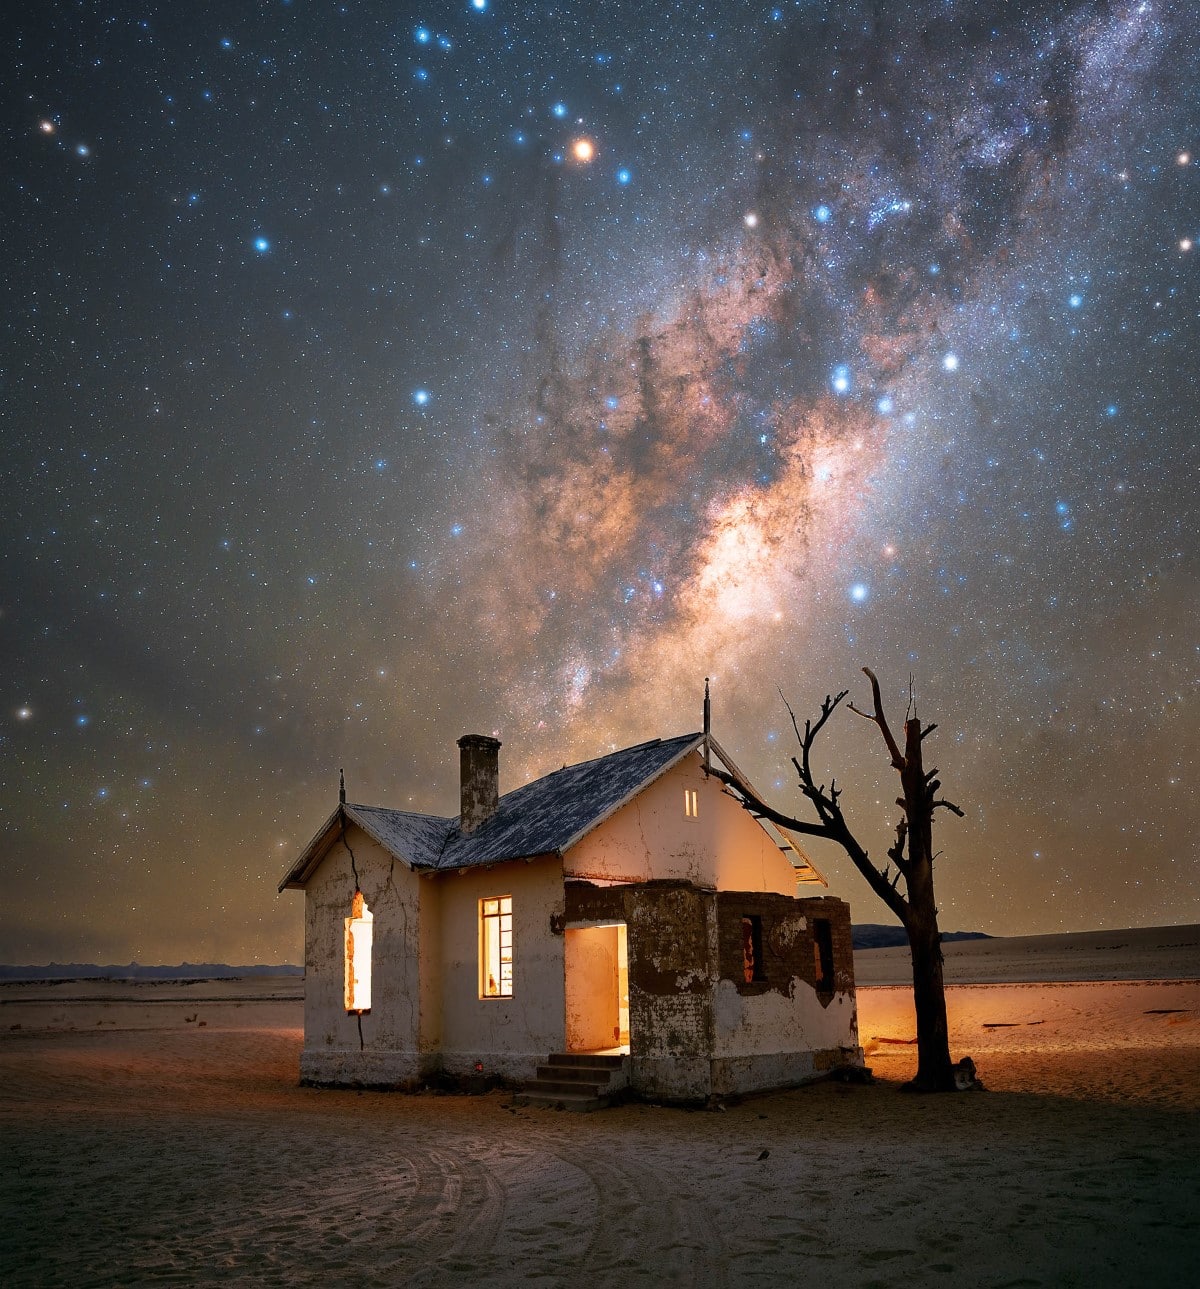 Abandoned house in the middle of the Namib Desert with the Milky Way rising above it